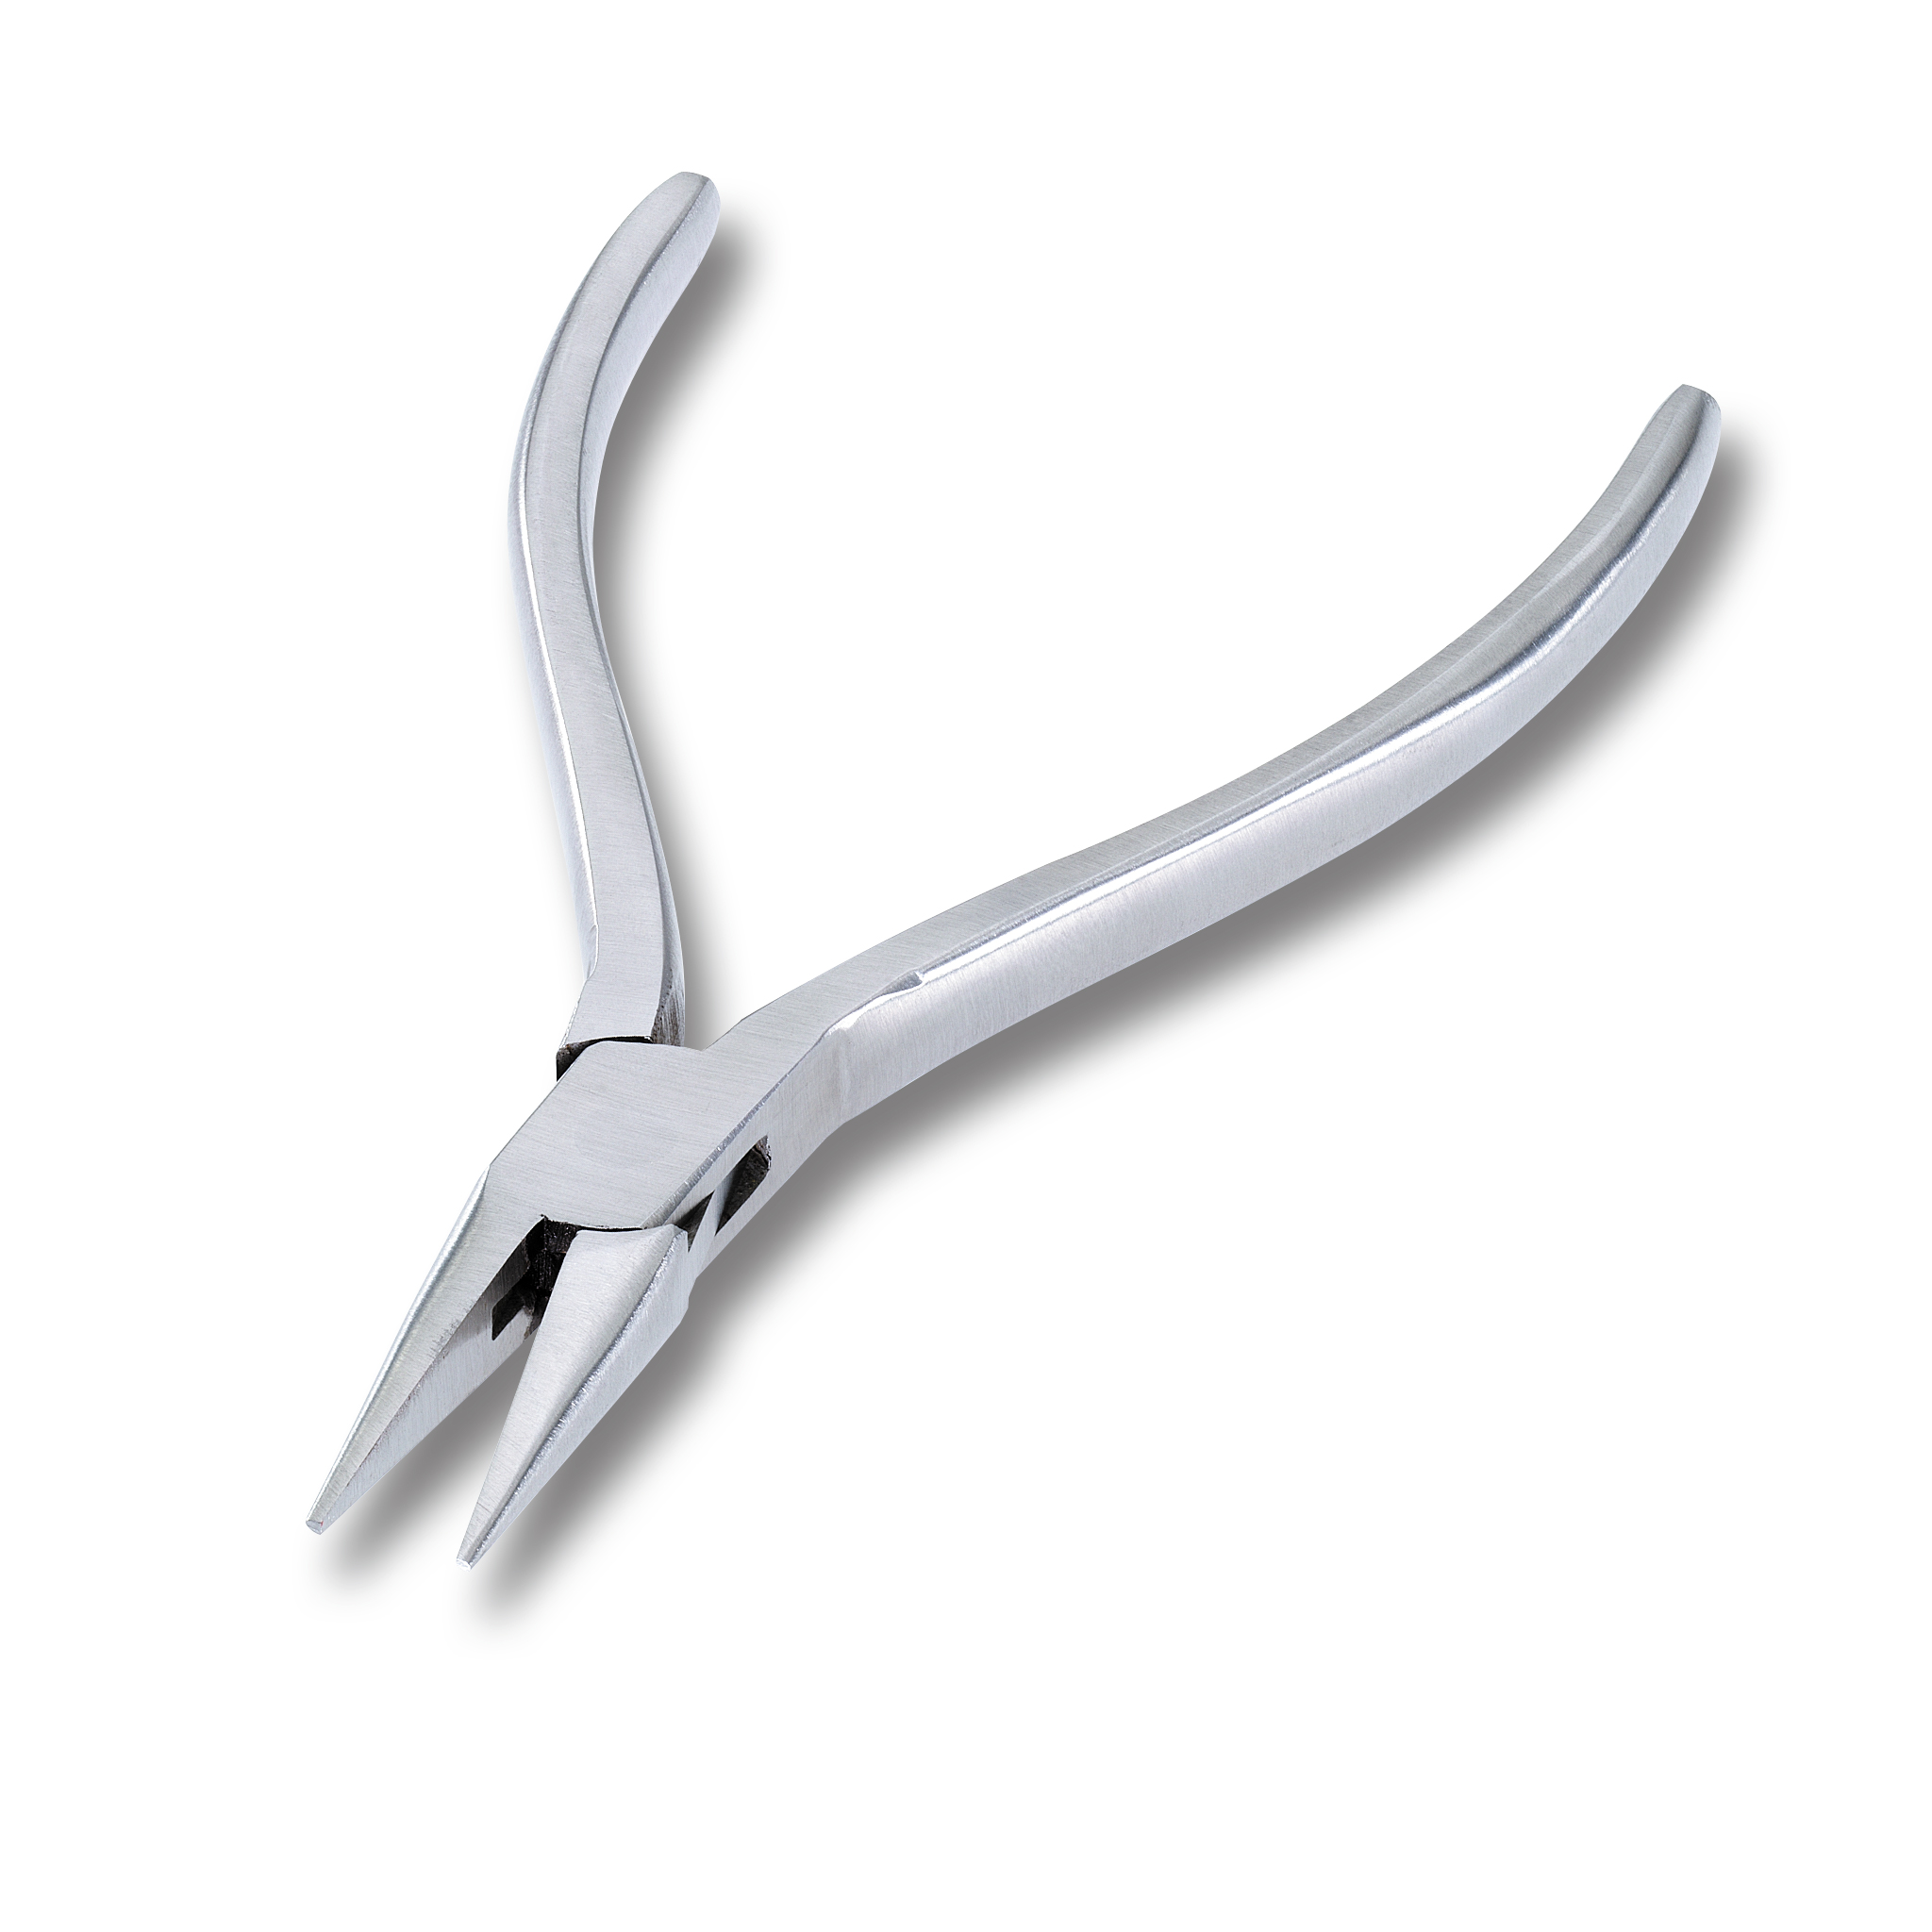 Watchmaker's flat nose pliers 